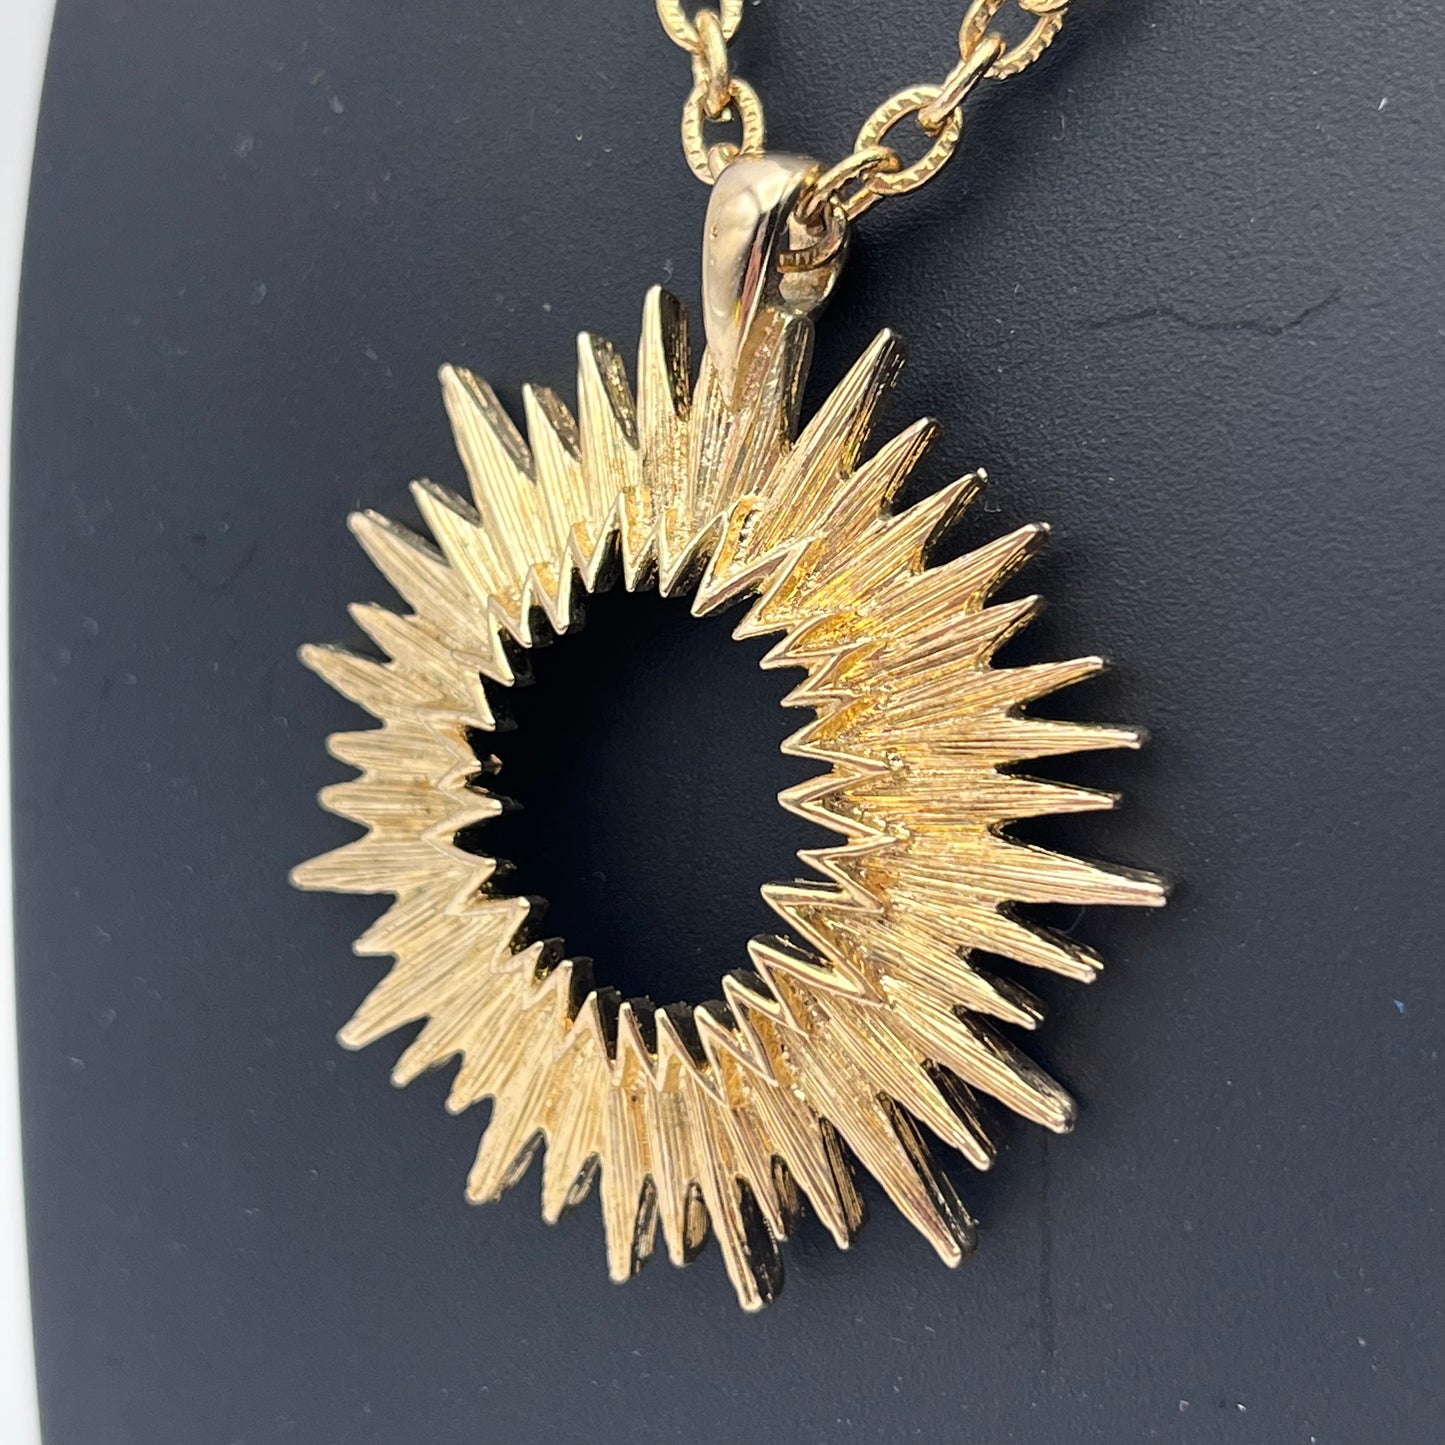 1976 Sarah Coventry Outer Space Necklacce